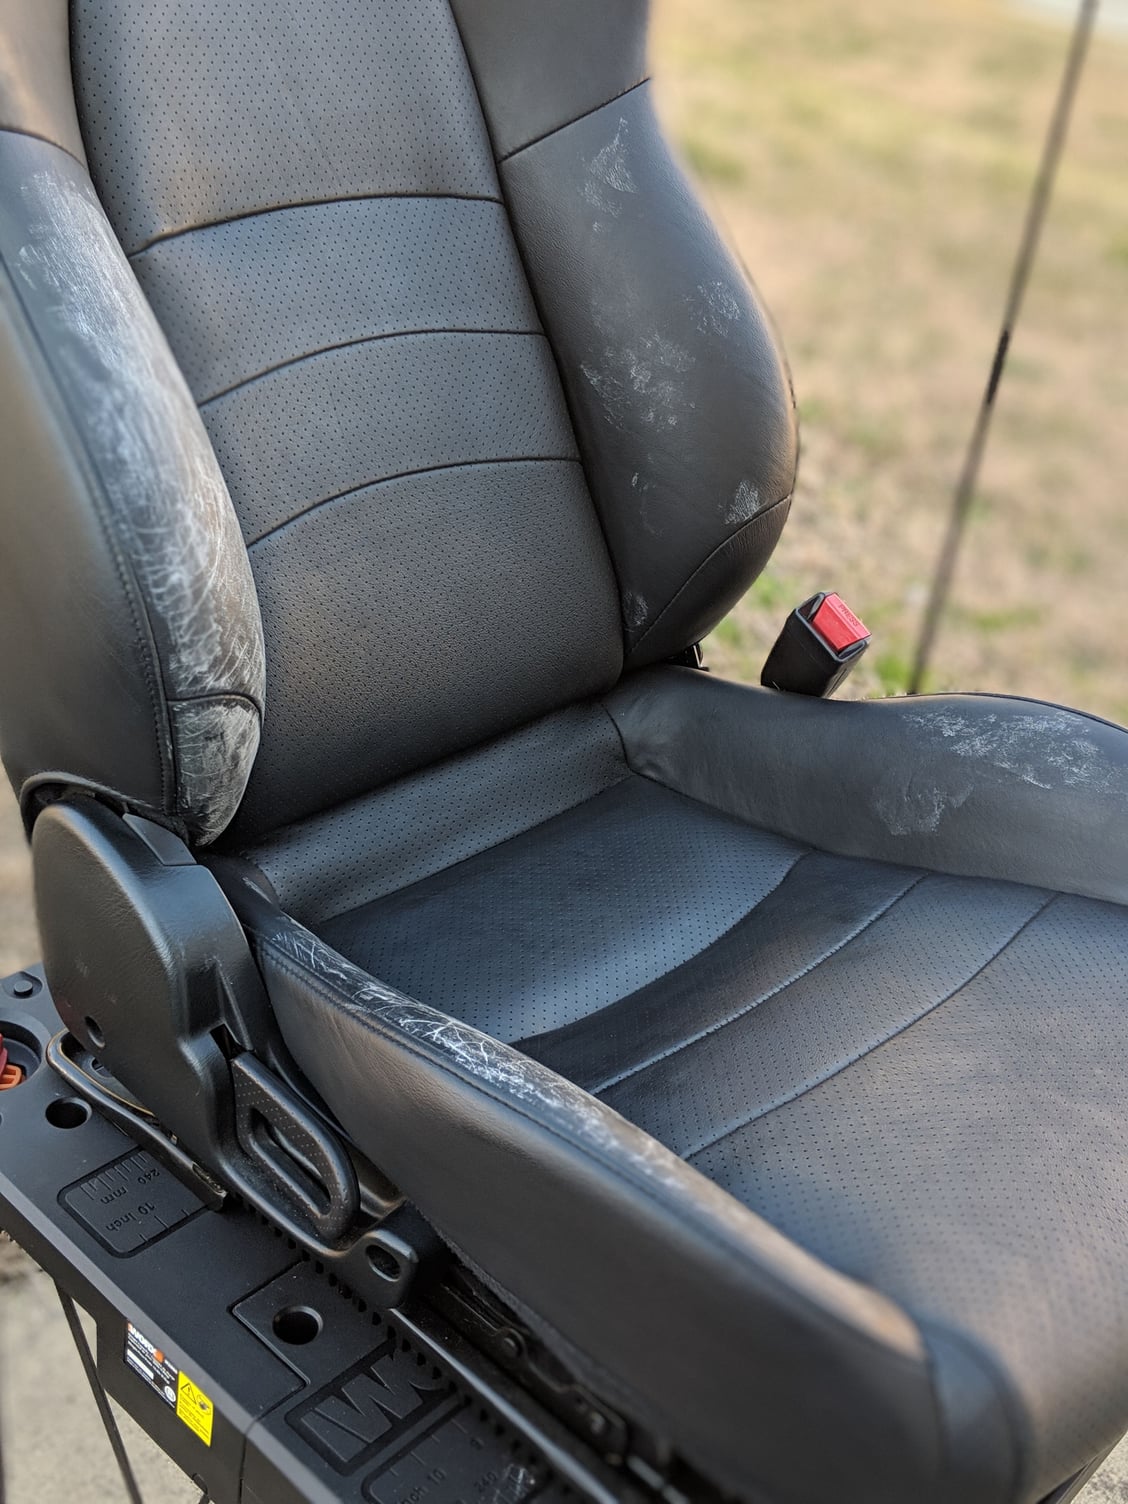 Seat leather repair, what to do? : r/S2000